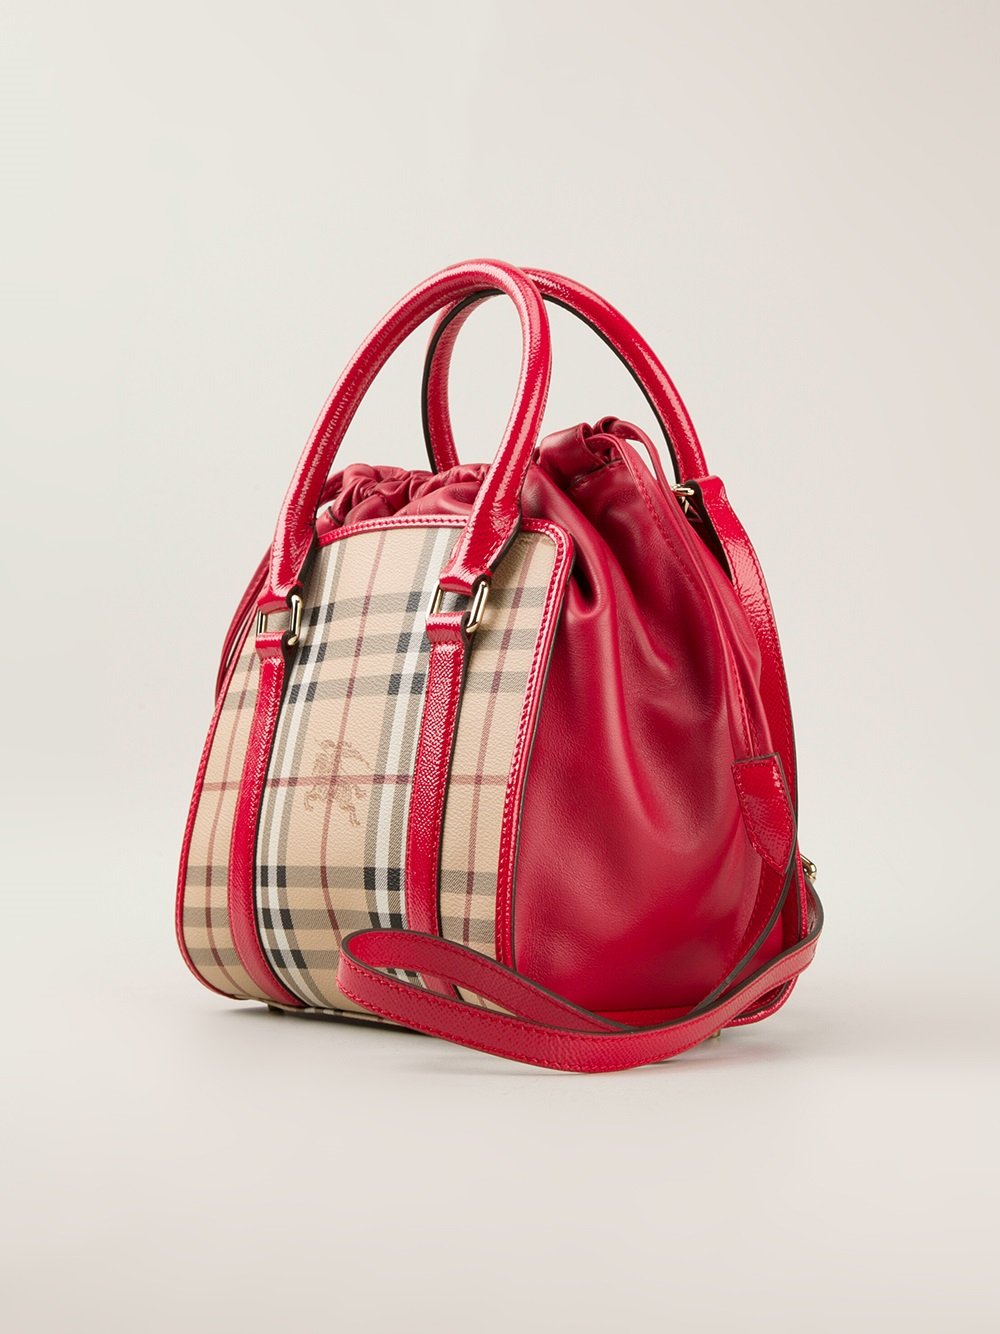 Lyst - Burberry Dinton Small Shoulder Bag in Red